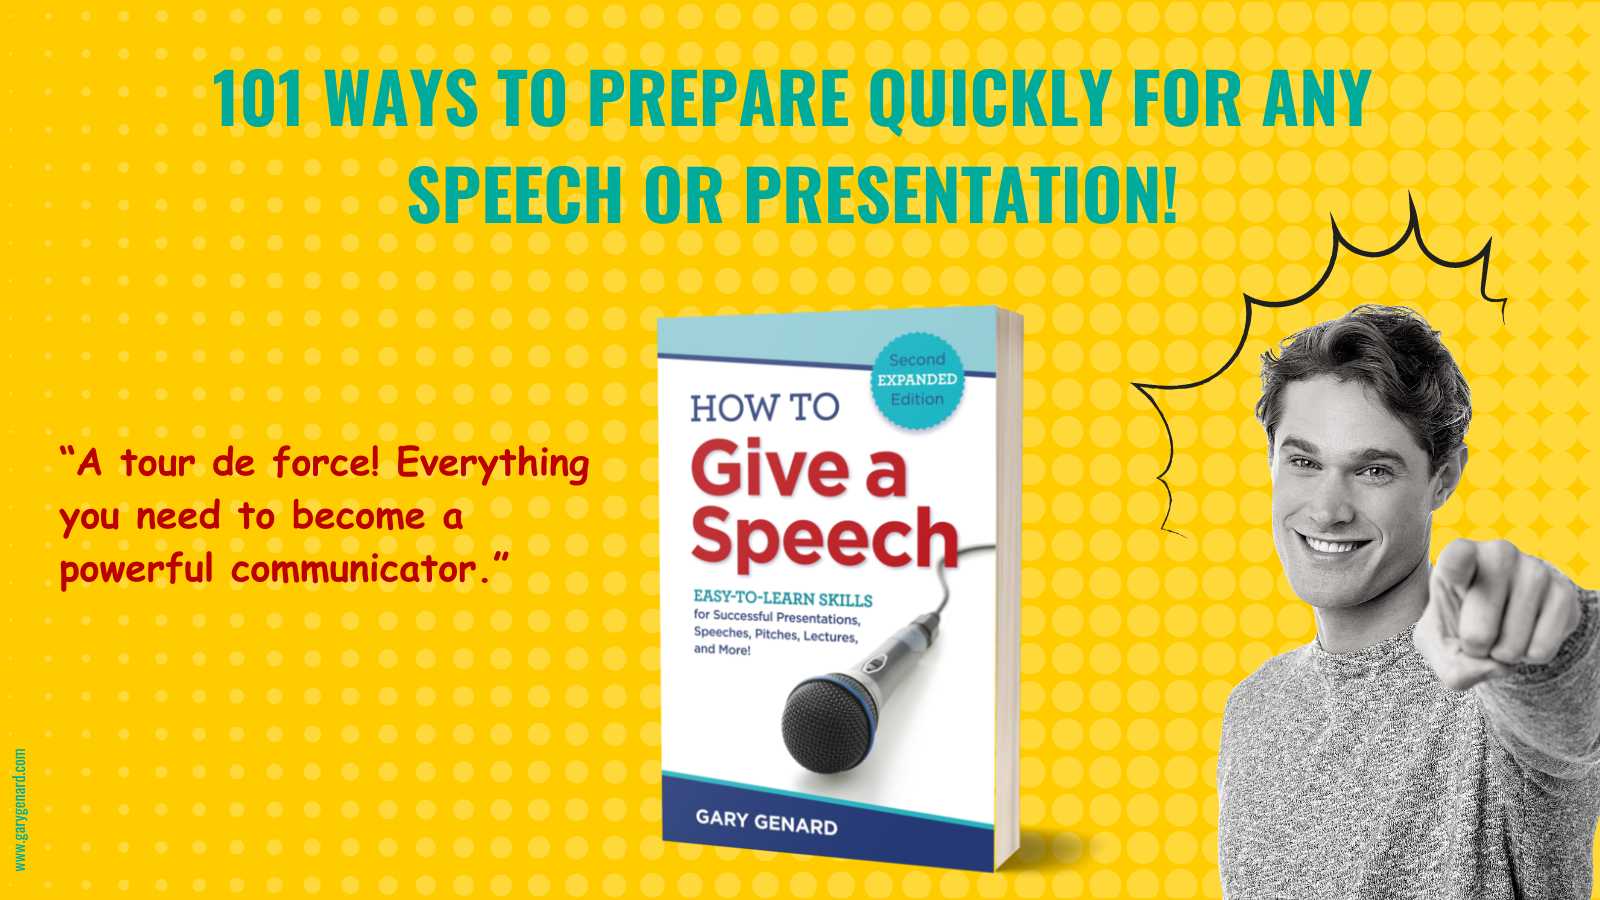 101 Ways to Prepare Quickly for Any Speech or Presentation!